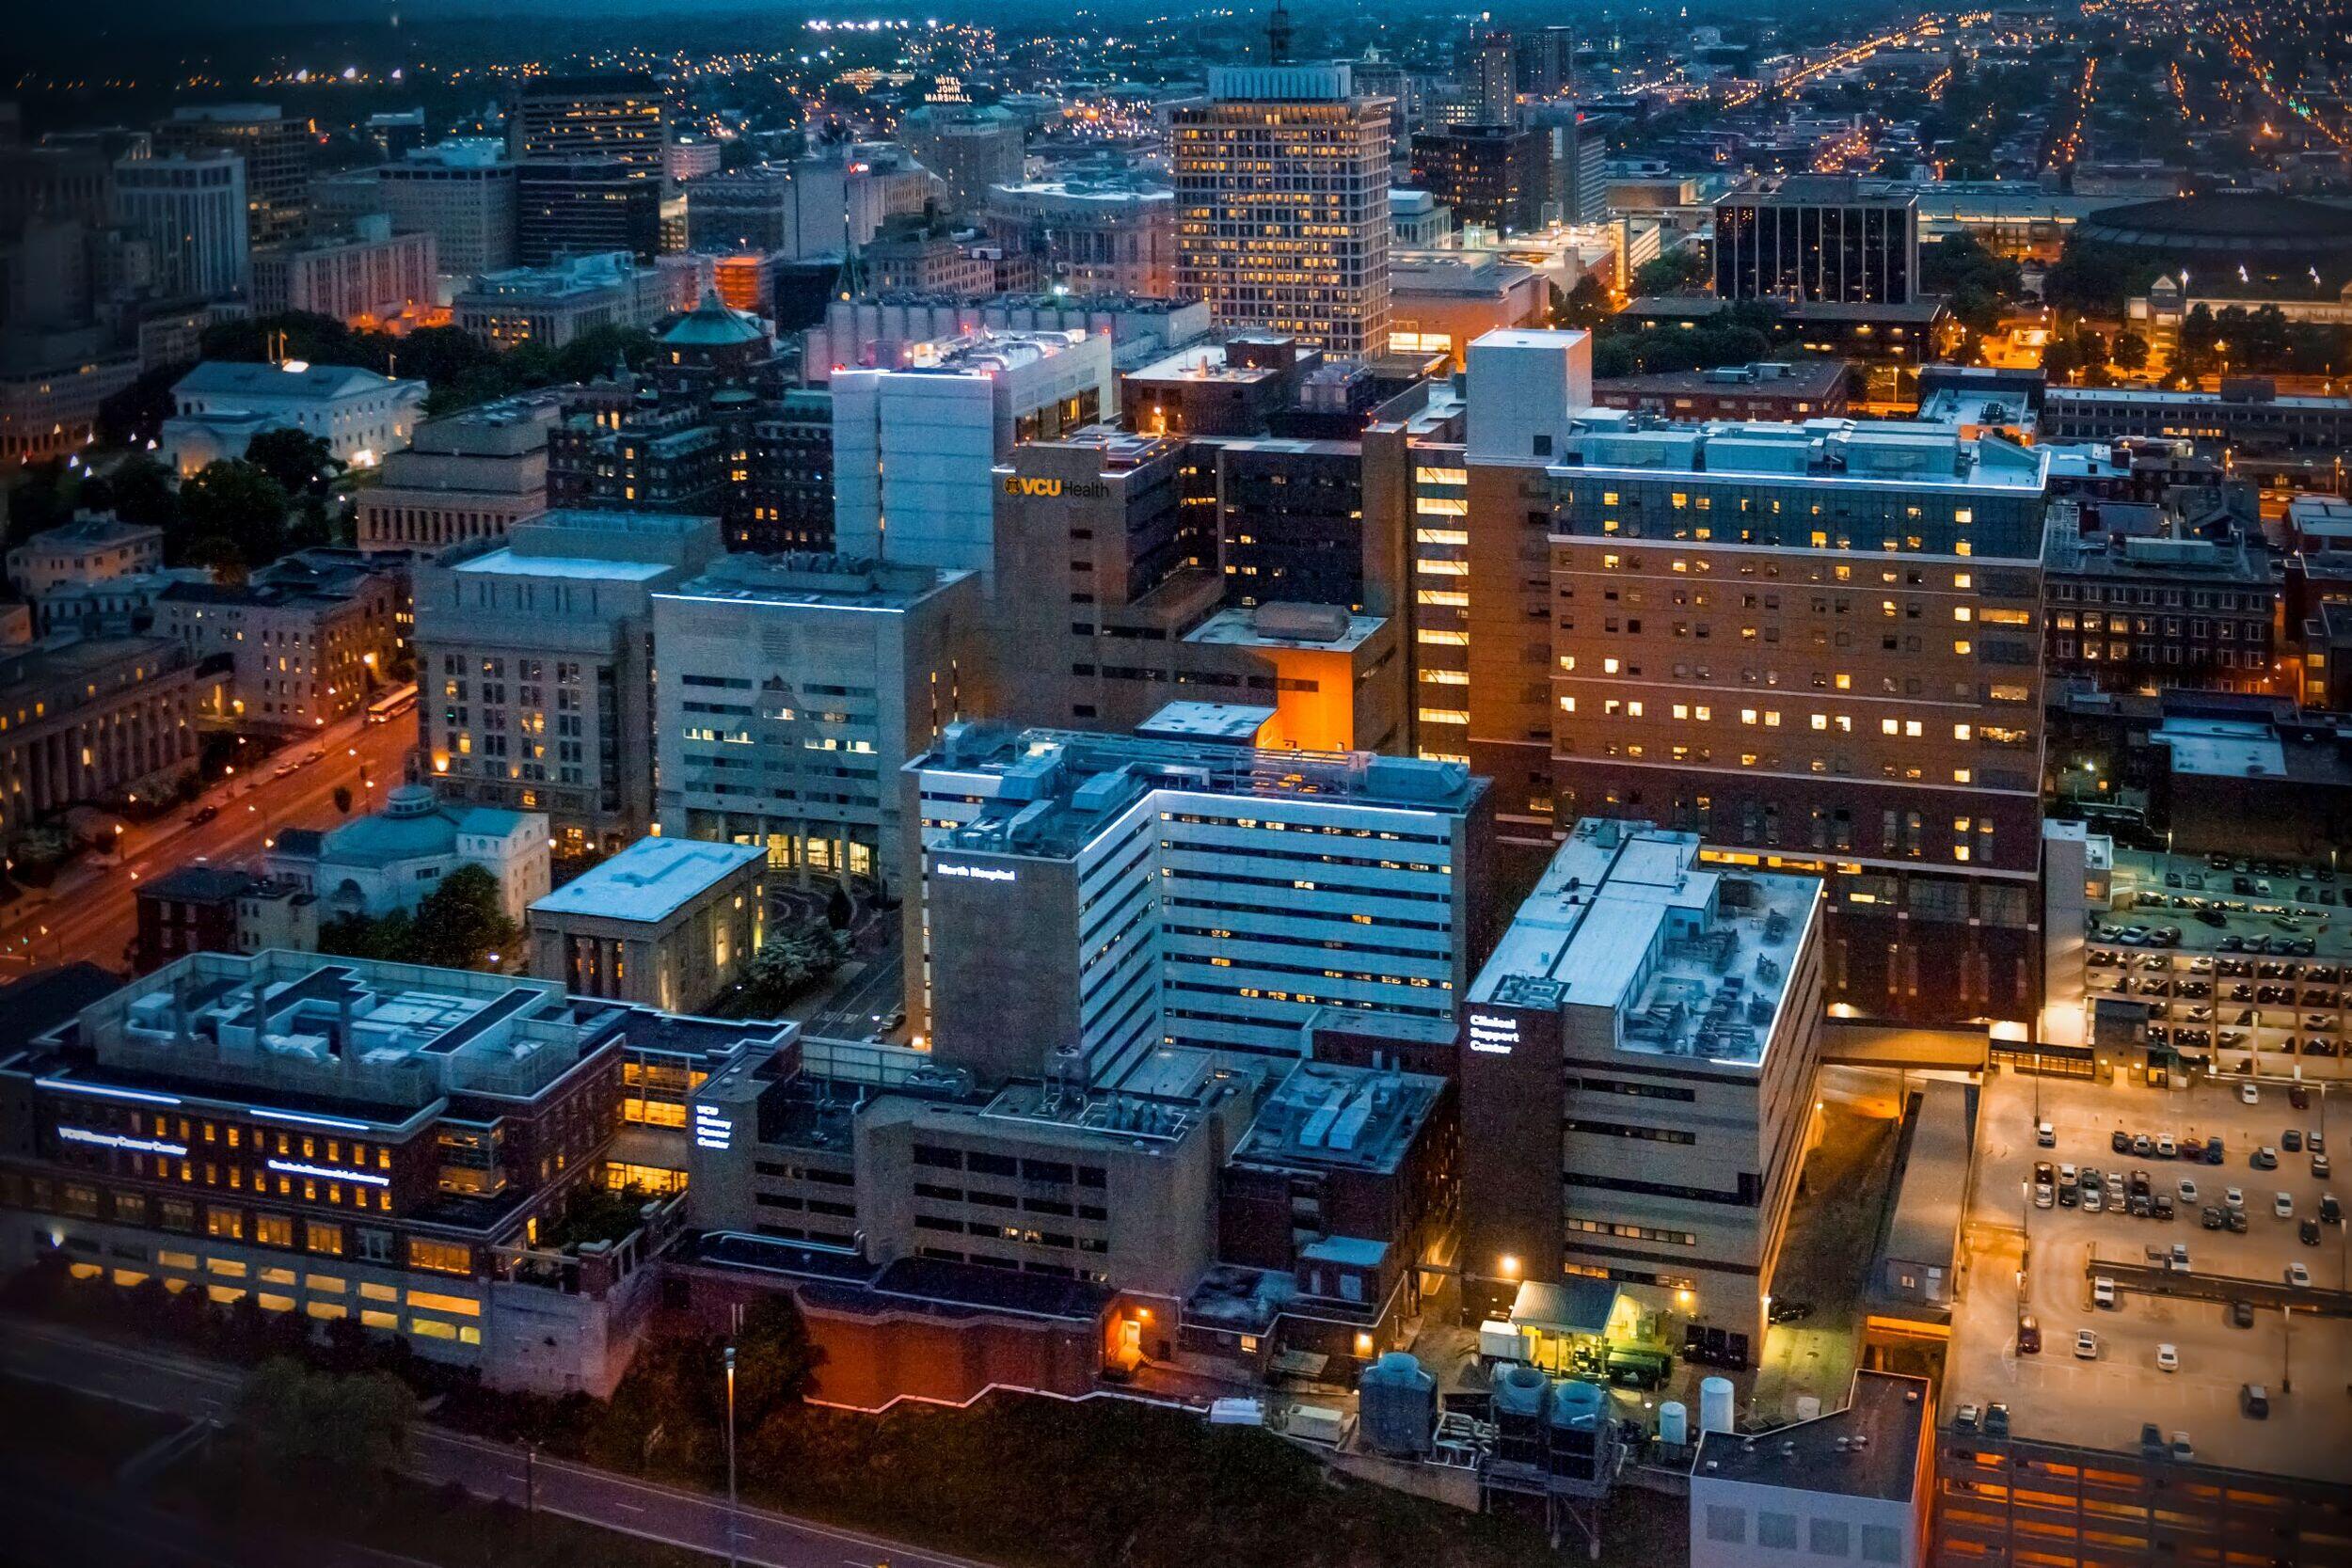 An areal view of MCV campus lit up at night